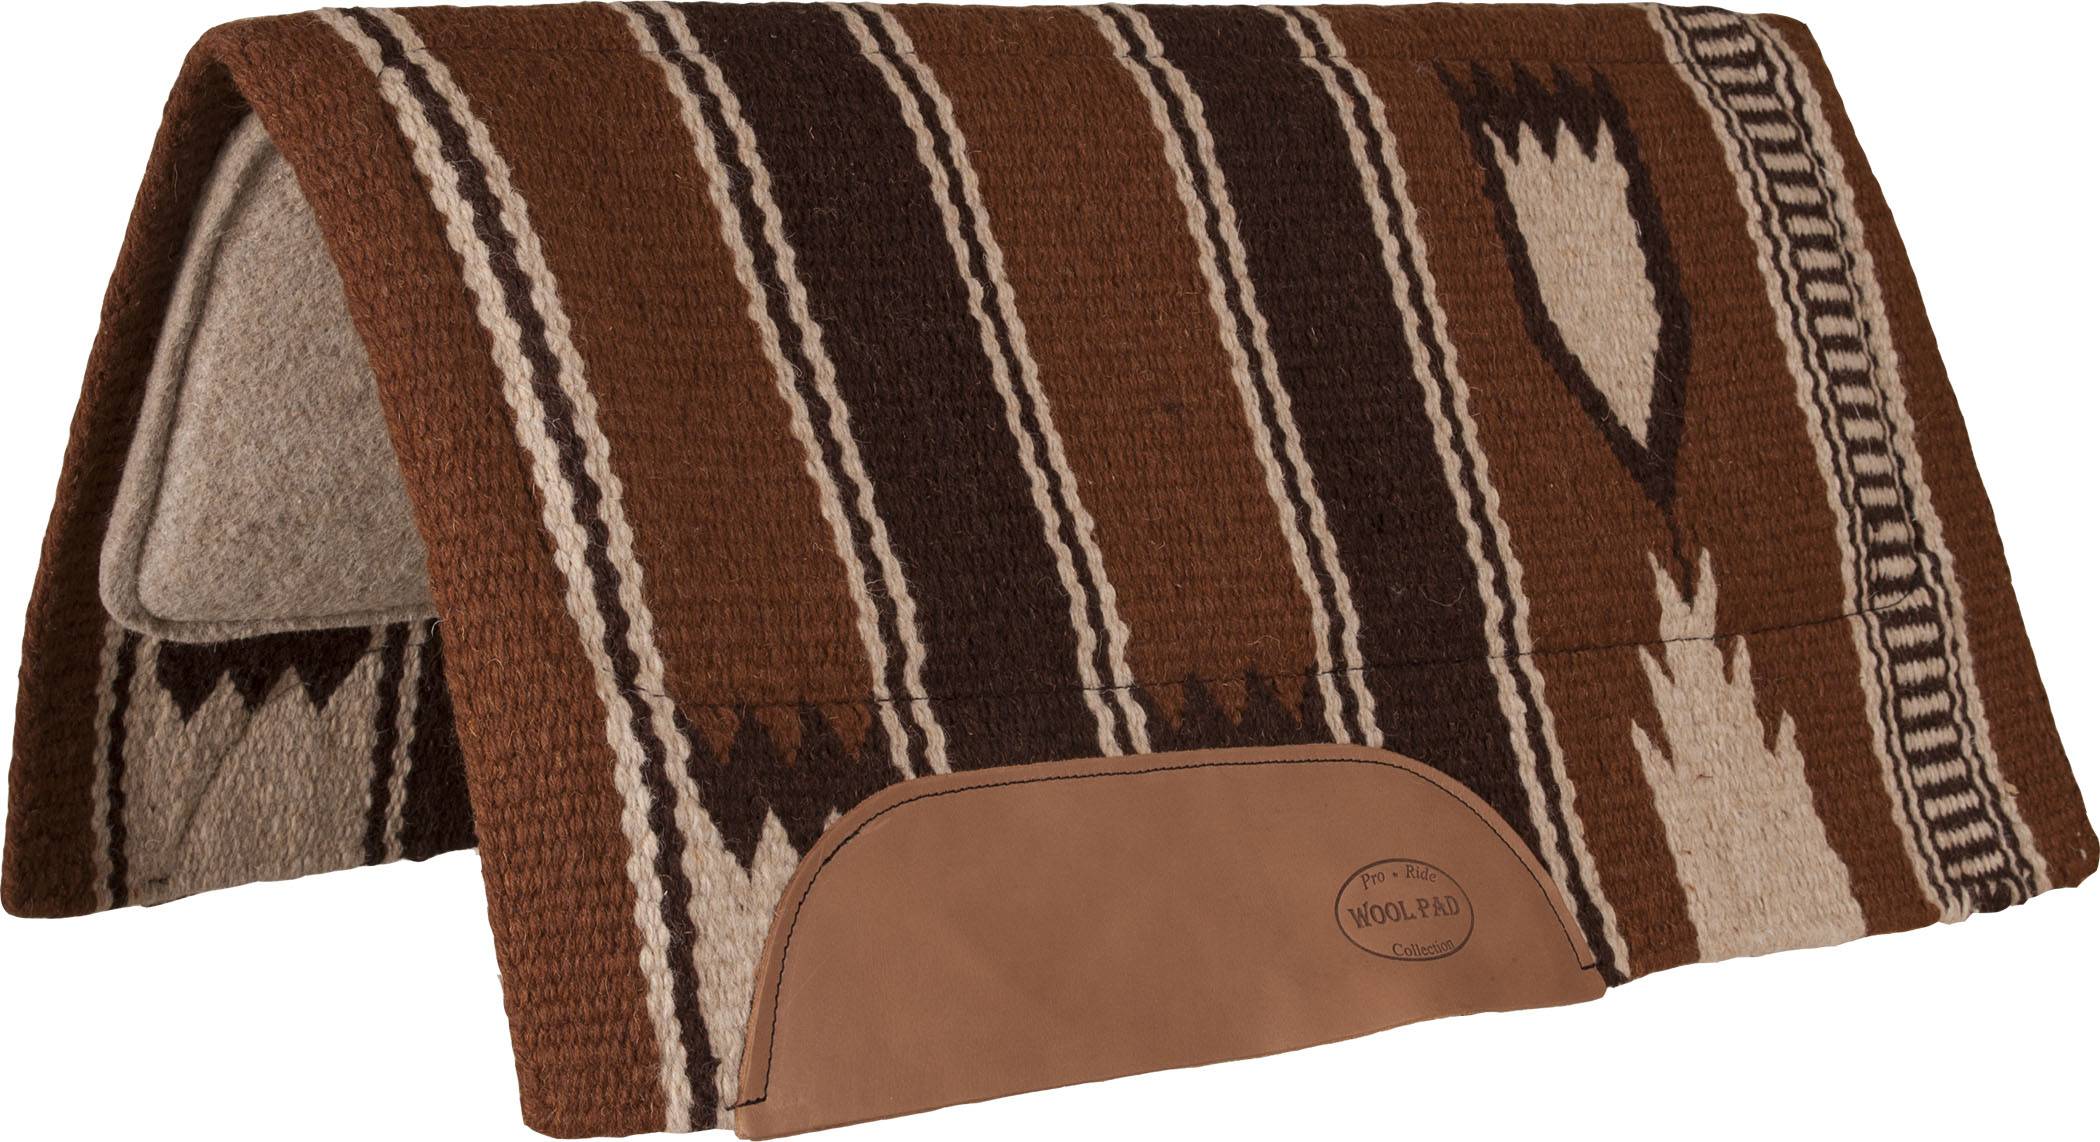 Mustang Spine Relief Show Pad Tan Wool Bottom